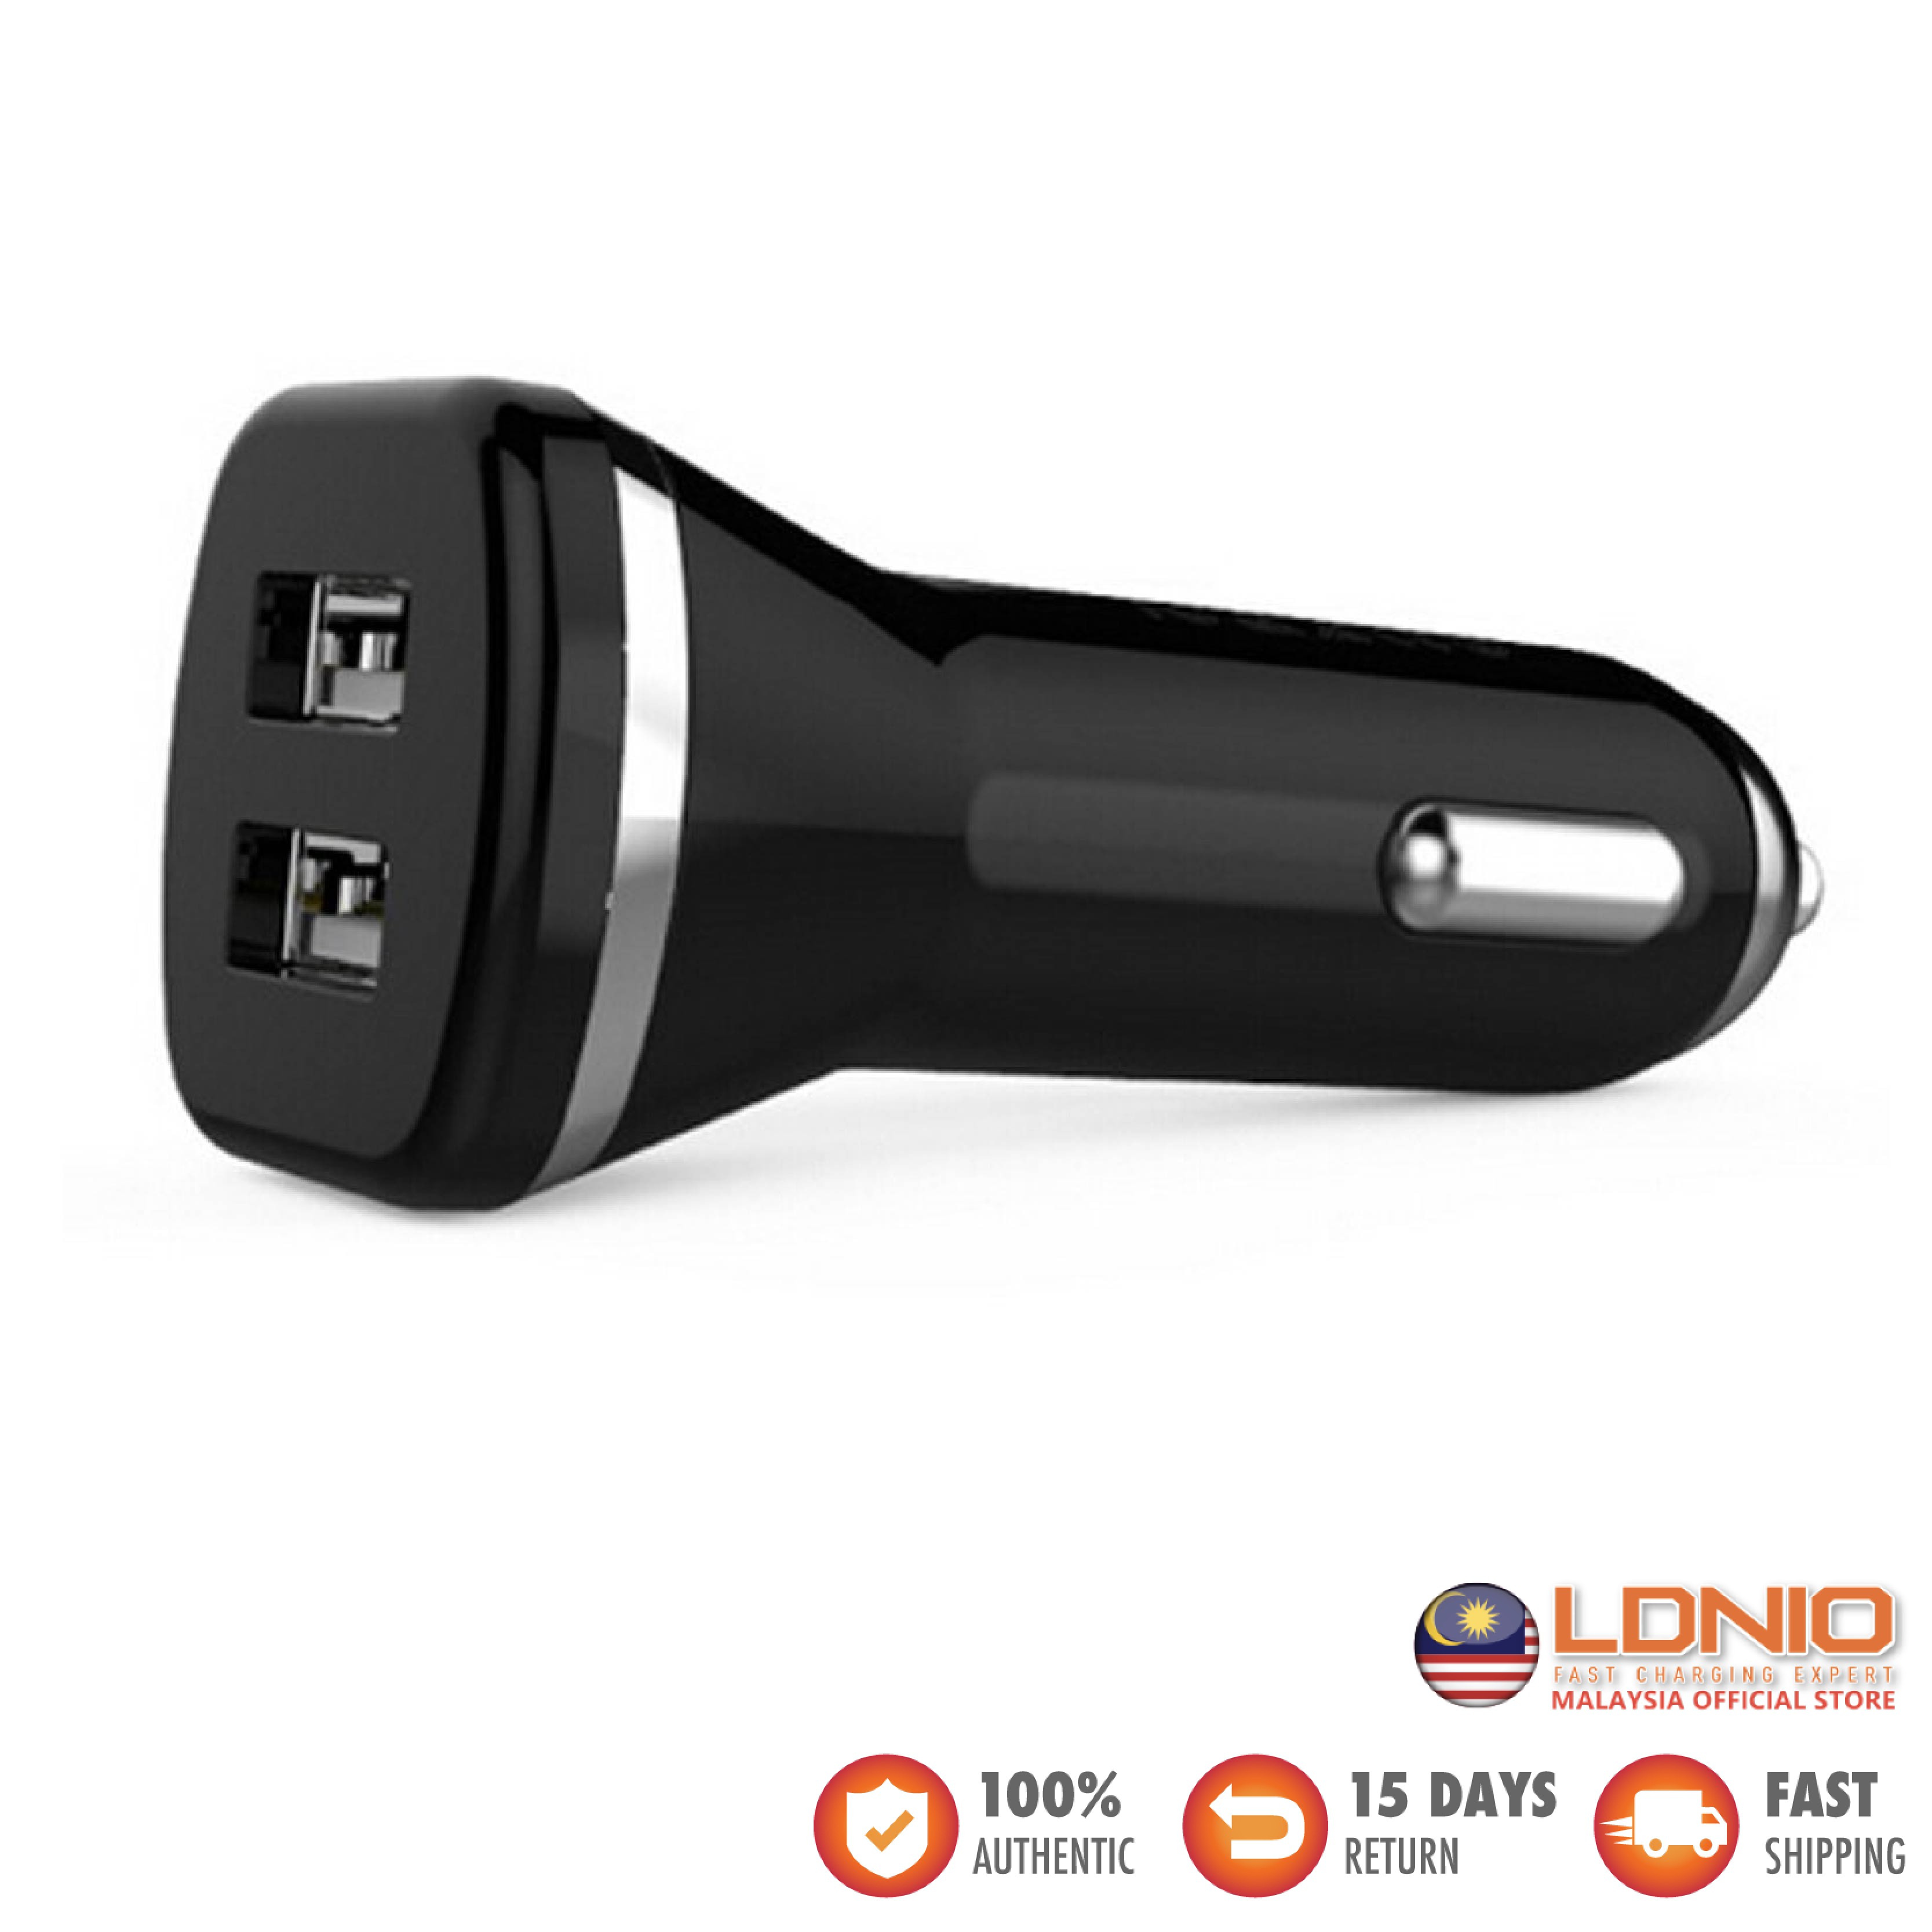 LDNIO DL-219 Dual 2 USB Car Charger with Micro USB Cable (2.1A/1m)